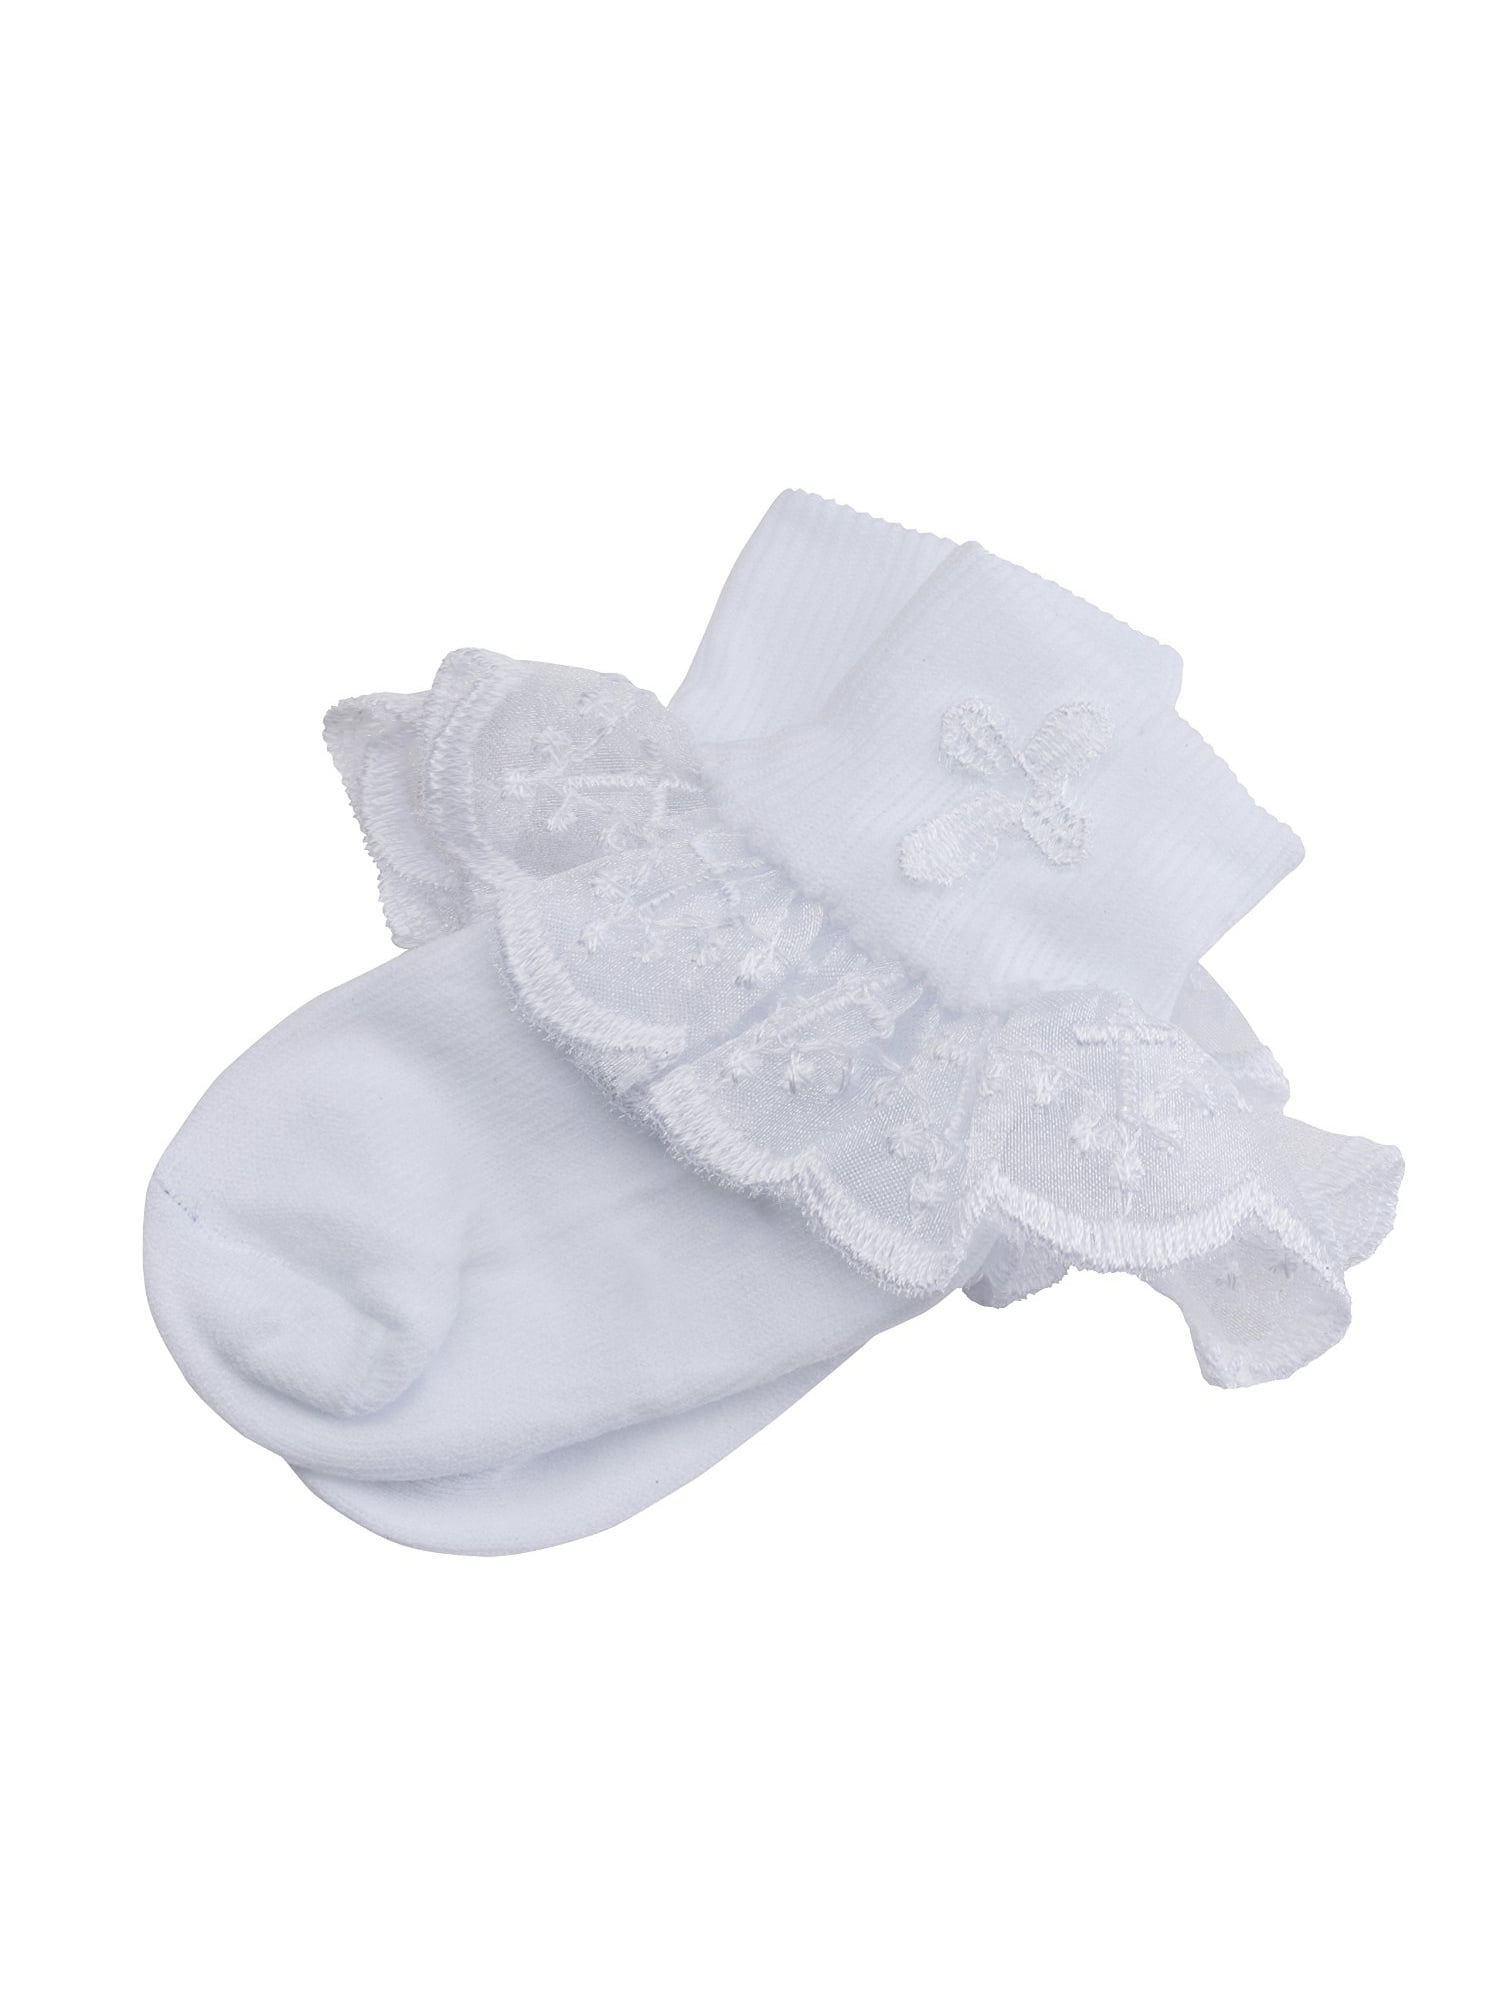 white embroidered Christening frilly white shawl cross applique, 